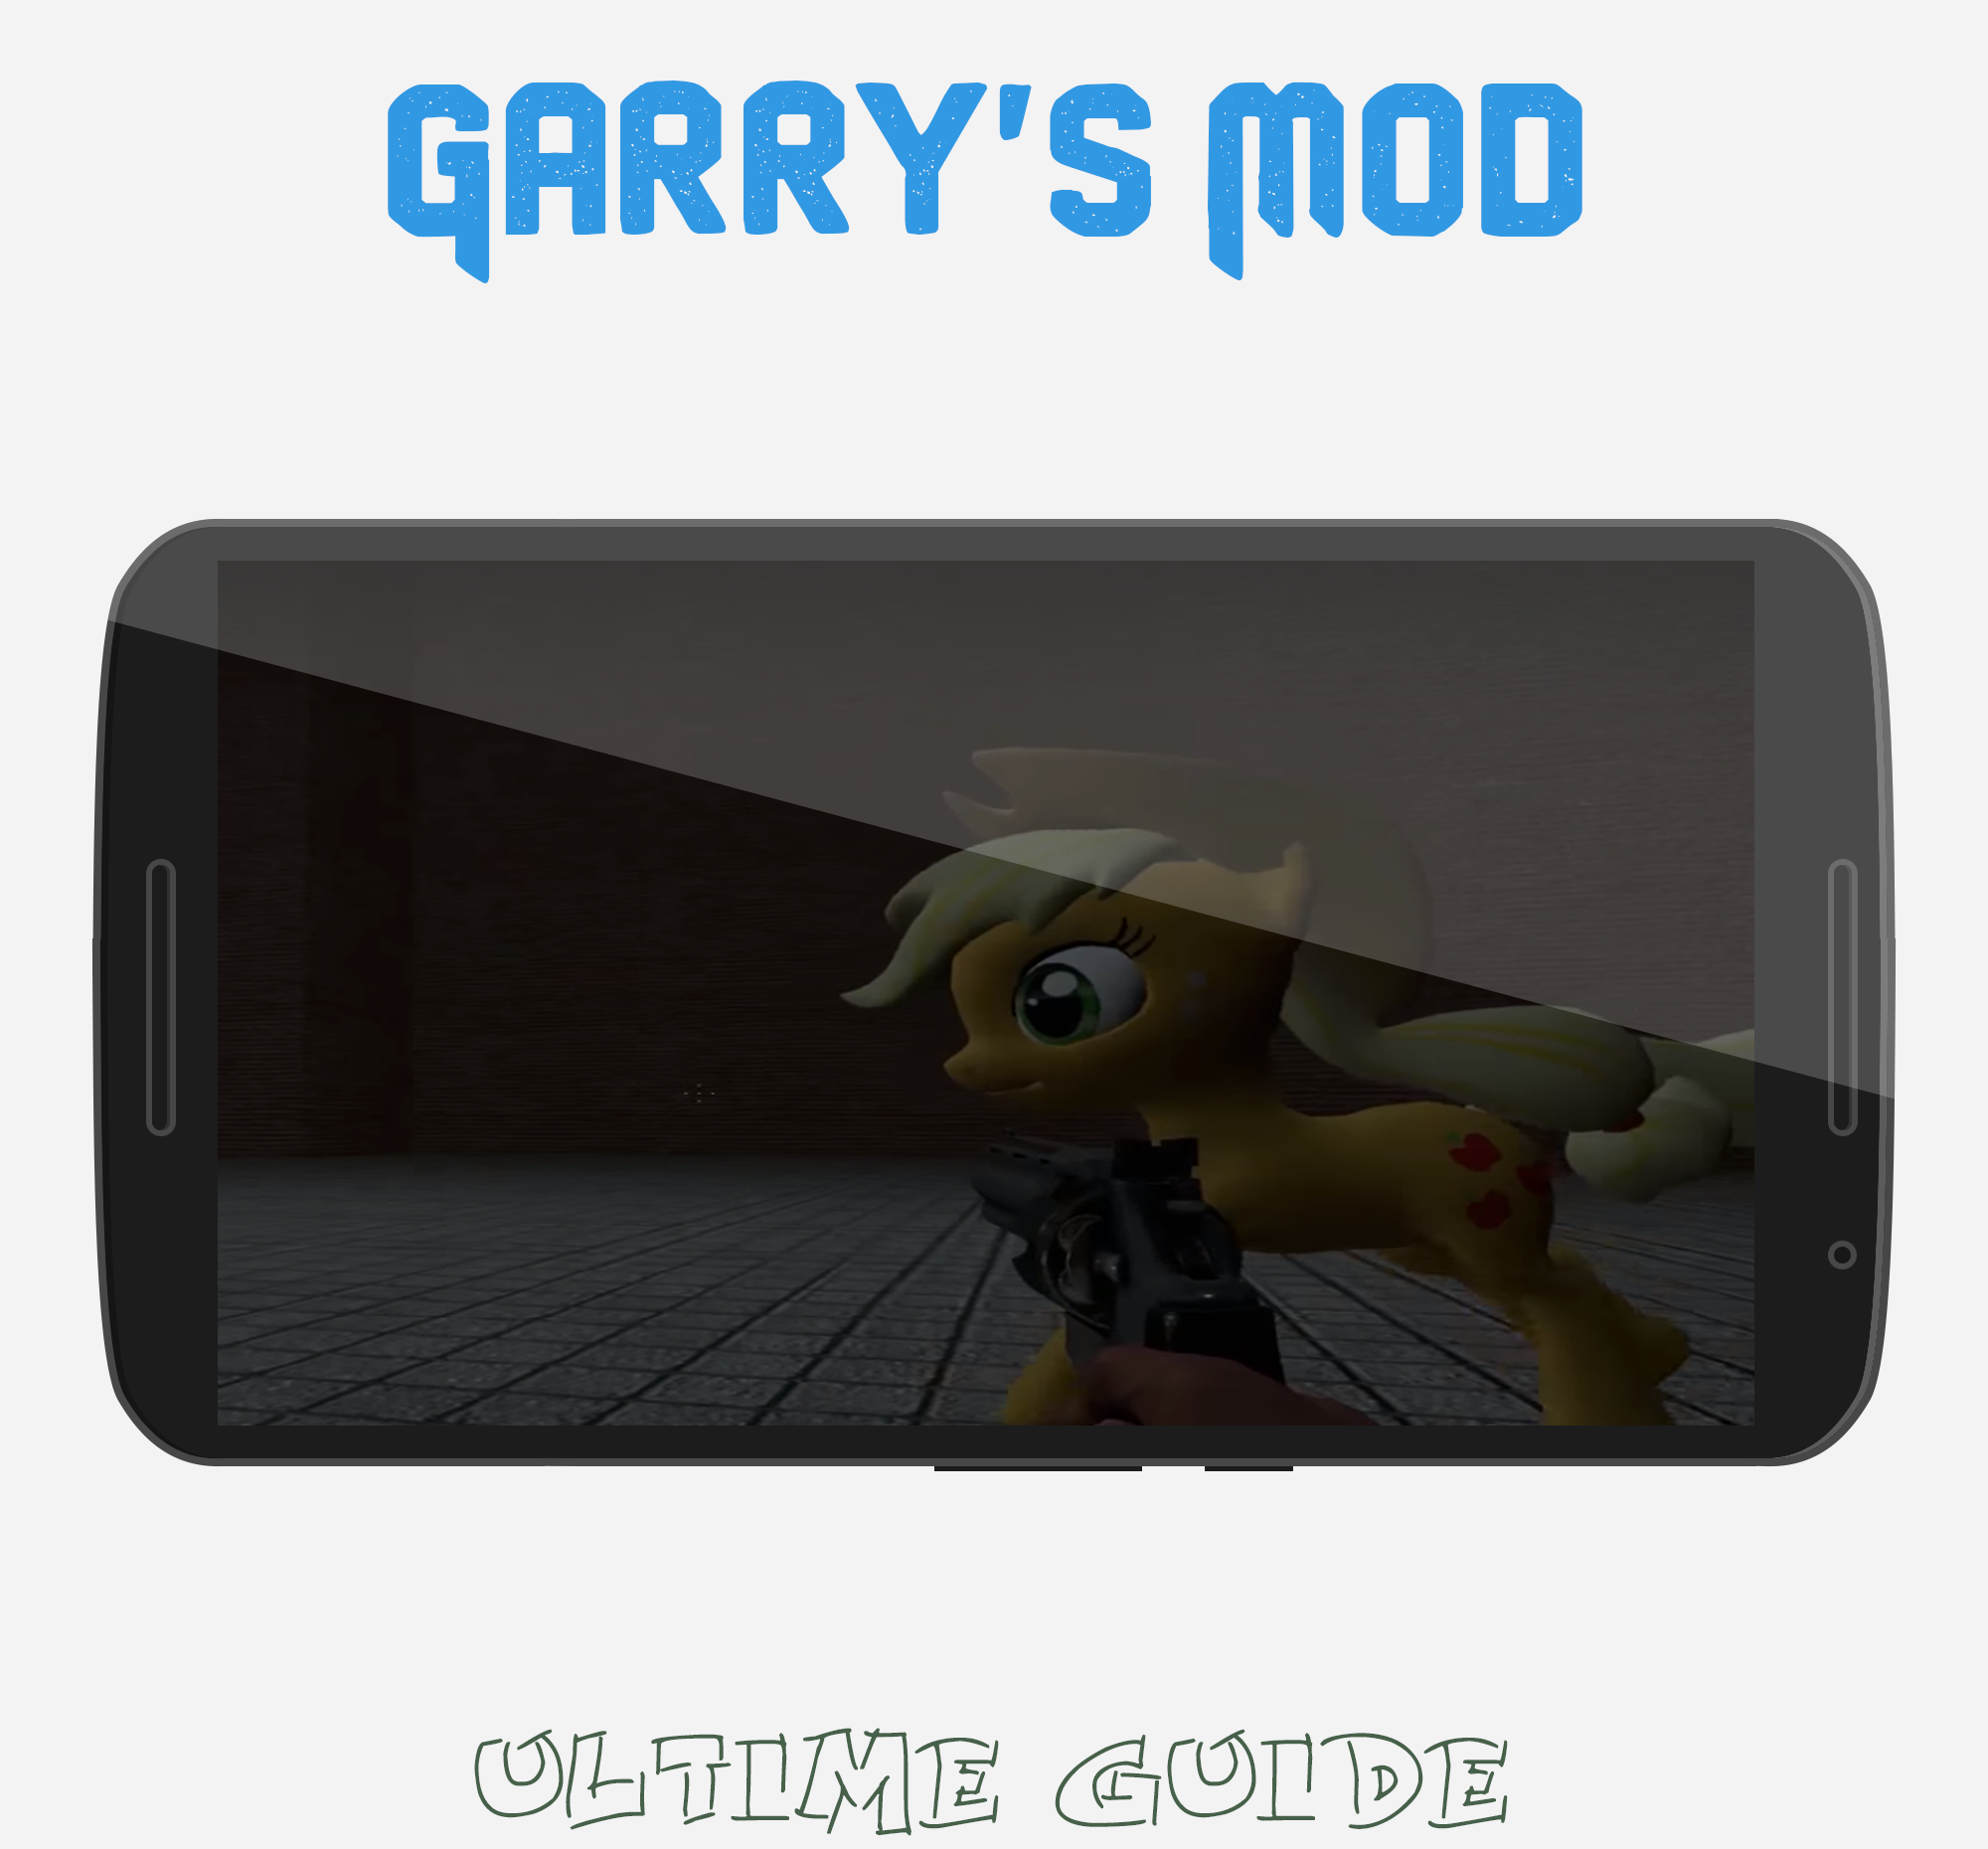 guide of Garry's mod Gmod Game for Android - APK Download - 